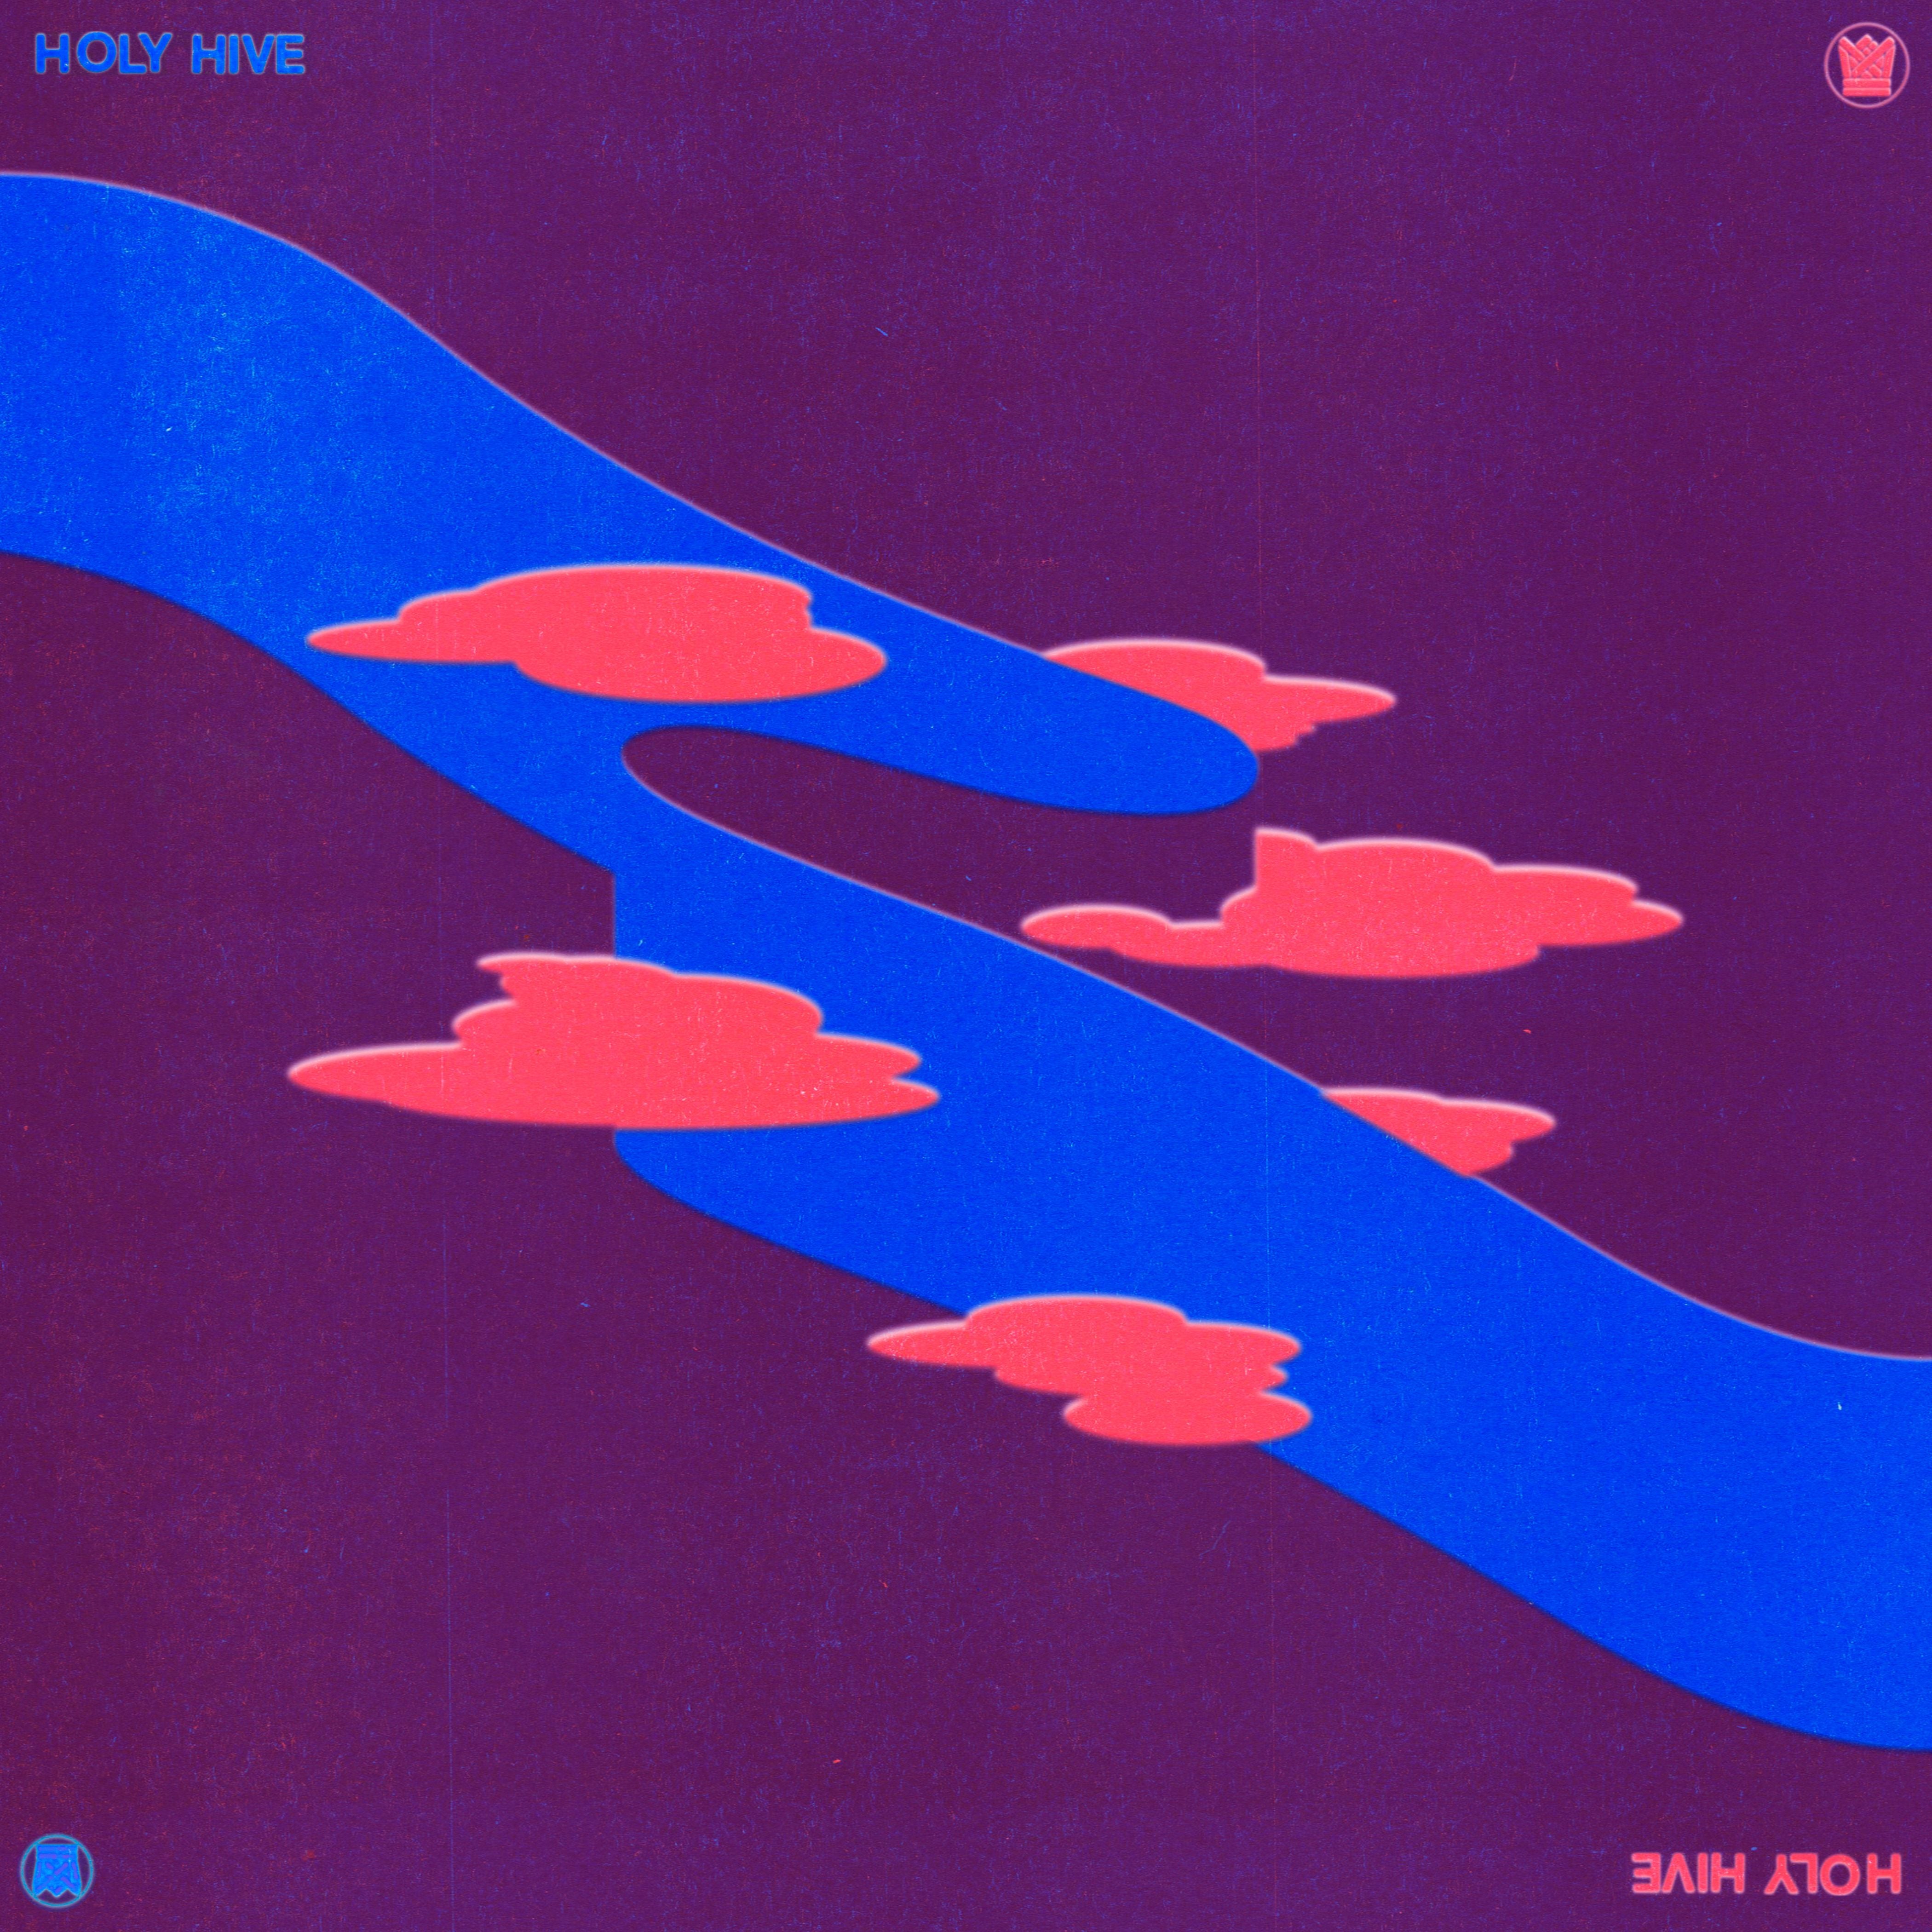 Holy Hive - Holy Hive [Plaid Room Records Exclusive Solid Pink Vinyl]